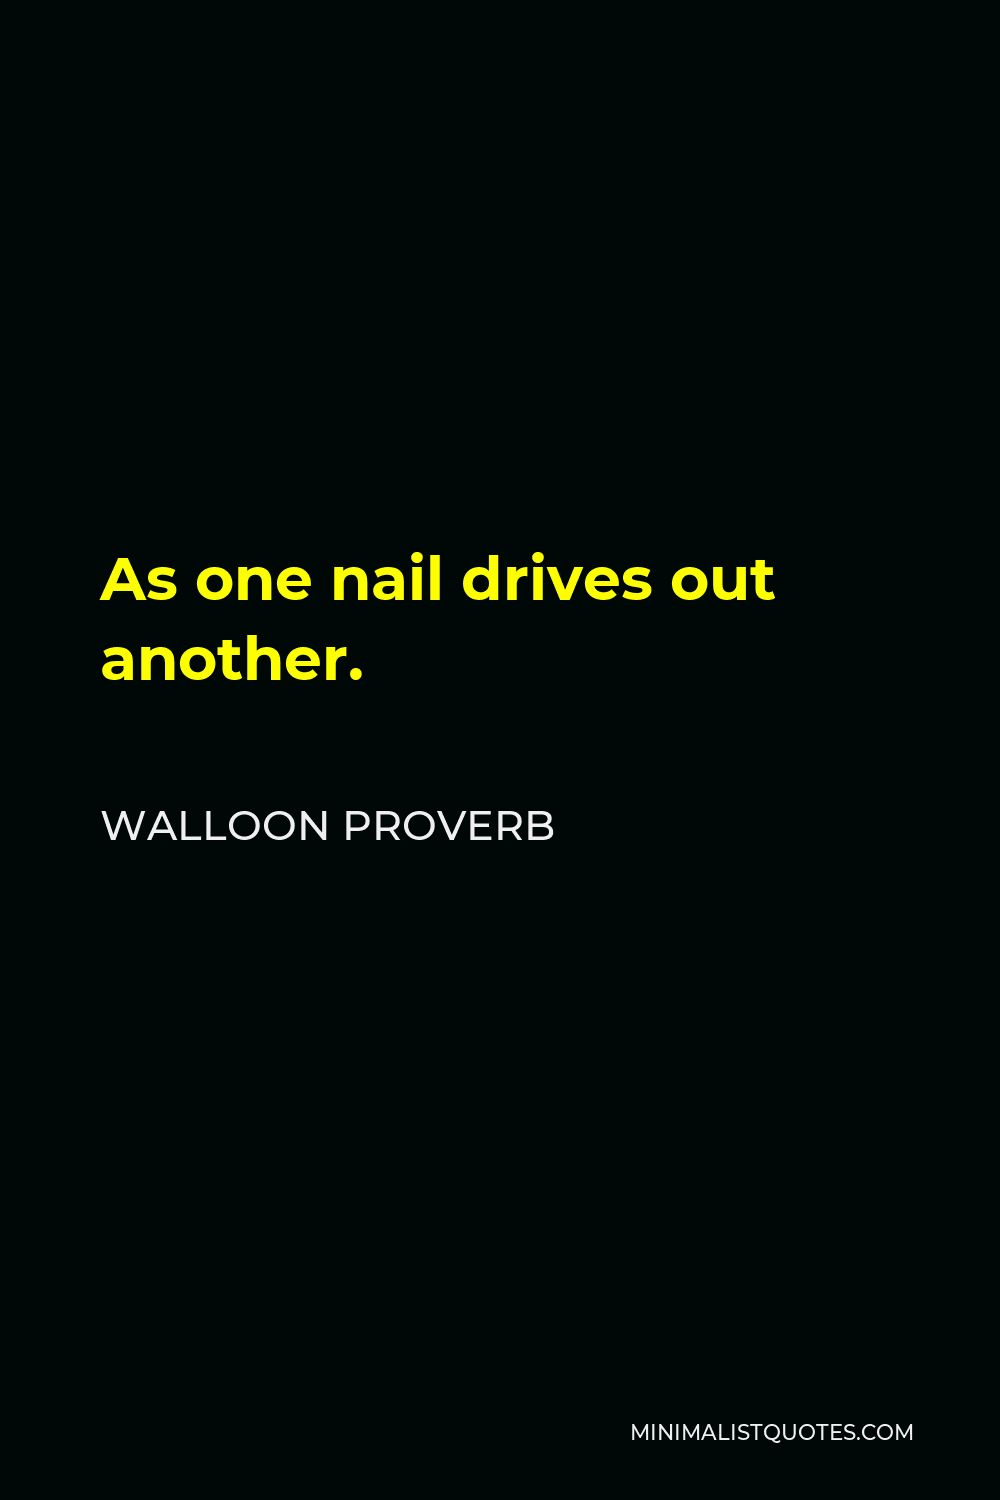 Walloon Proverb Quote - As one nail drives out another.